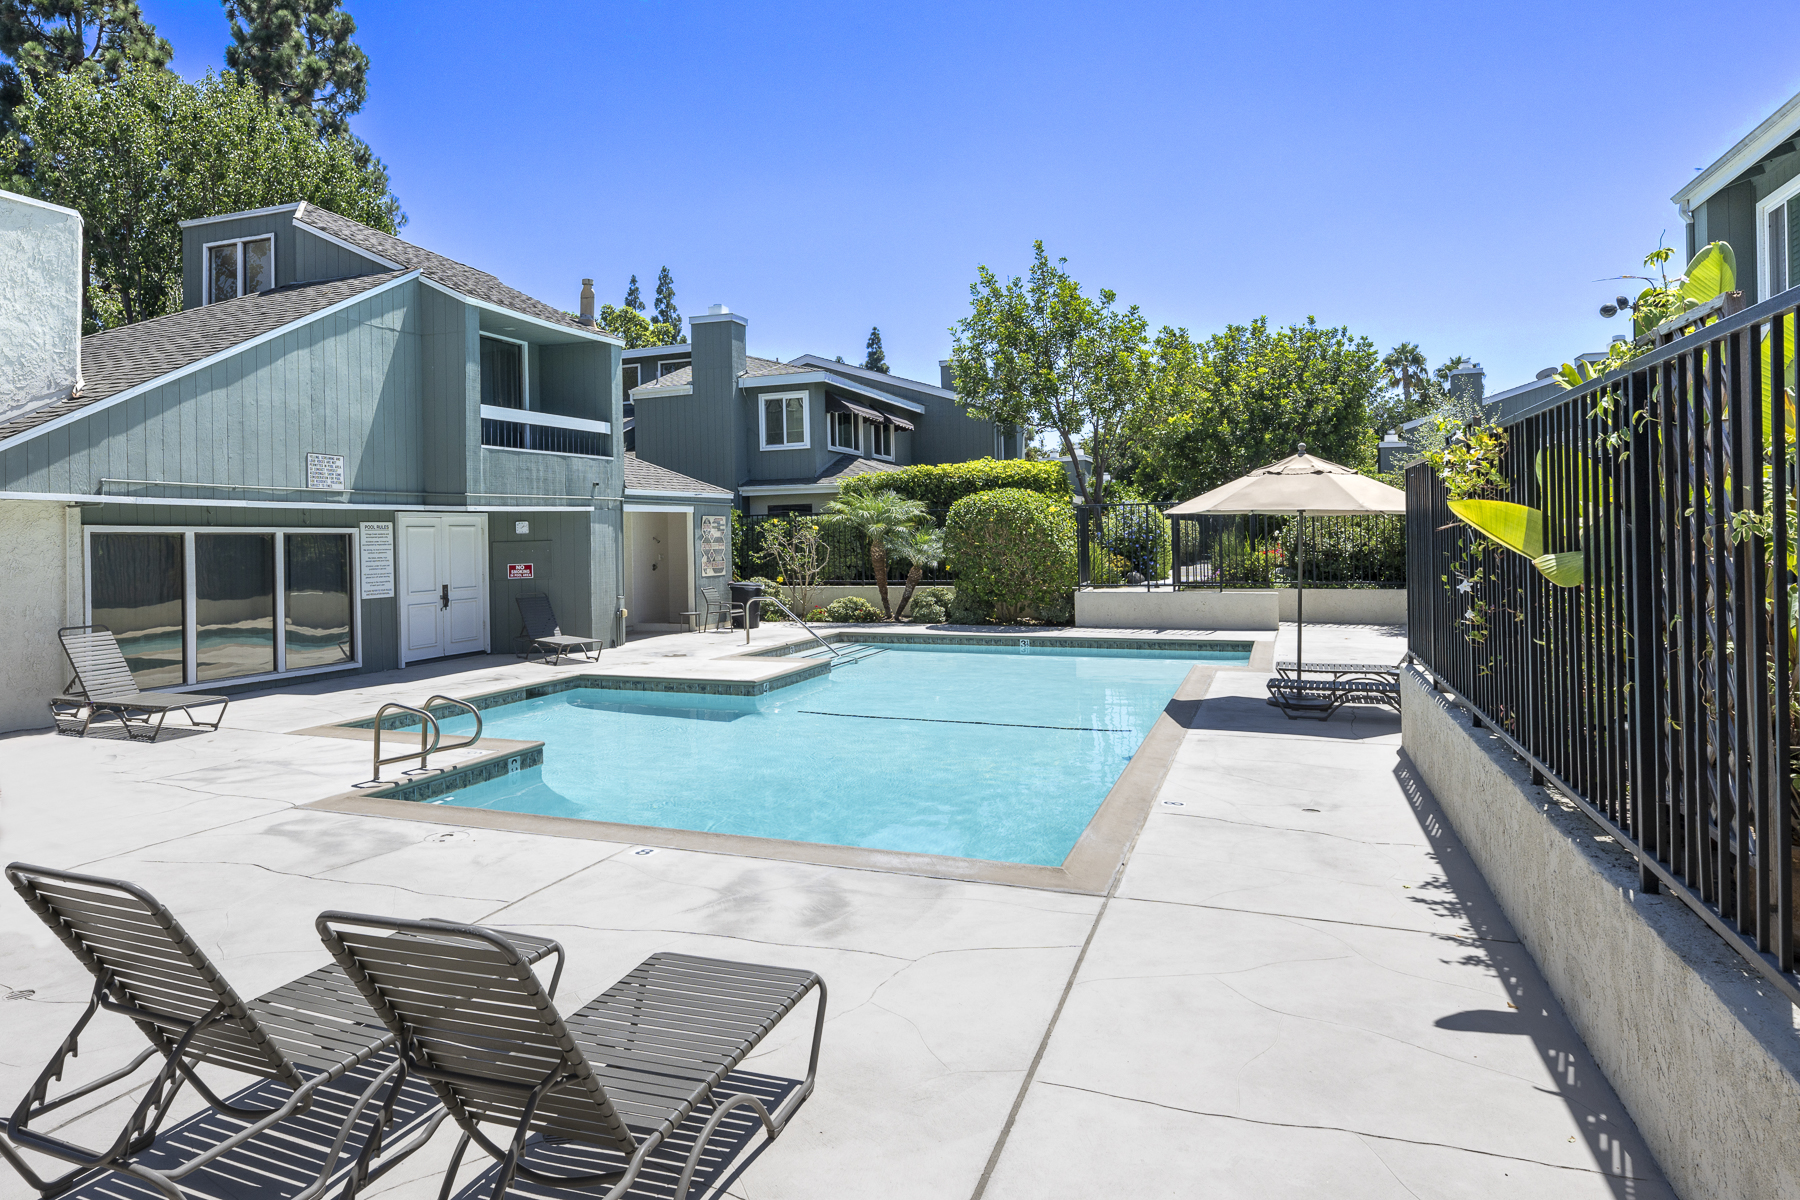 3424 Pinebrook Costa Mesa CA 92626: Pool with pool house and green landscaping.